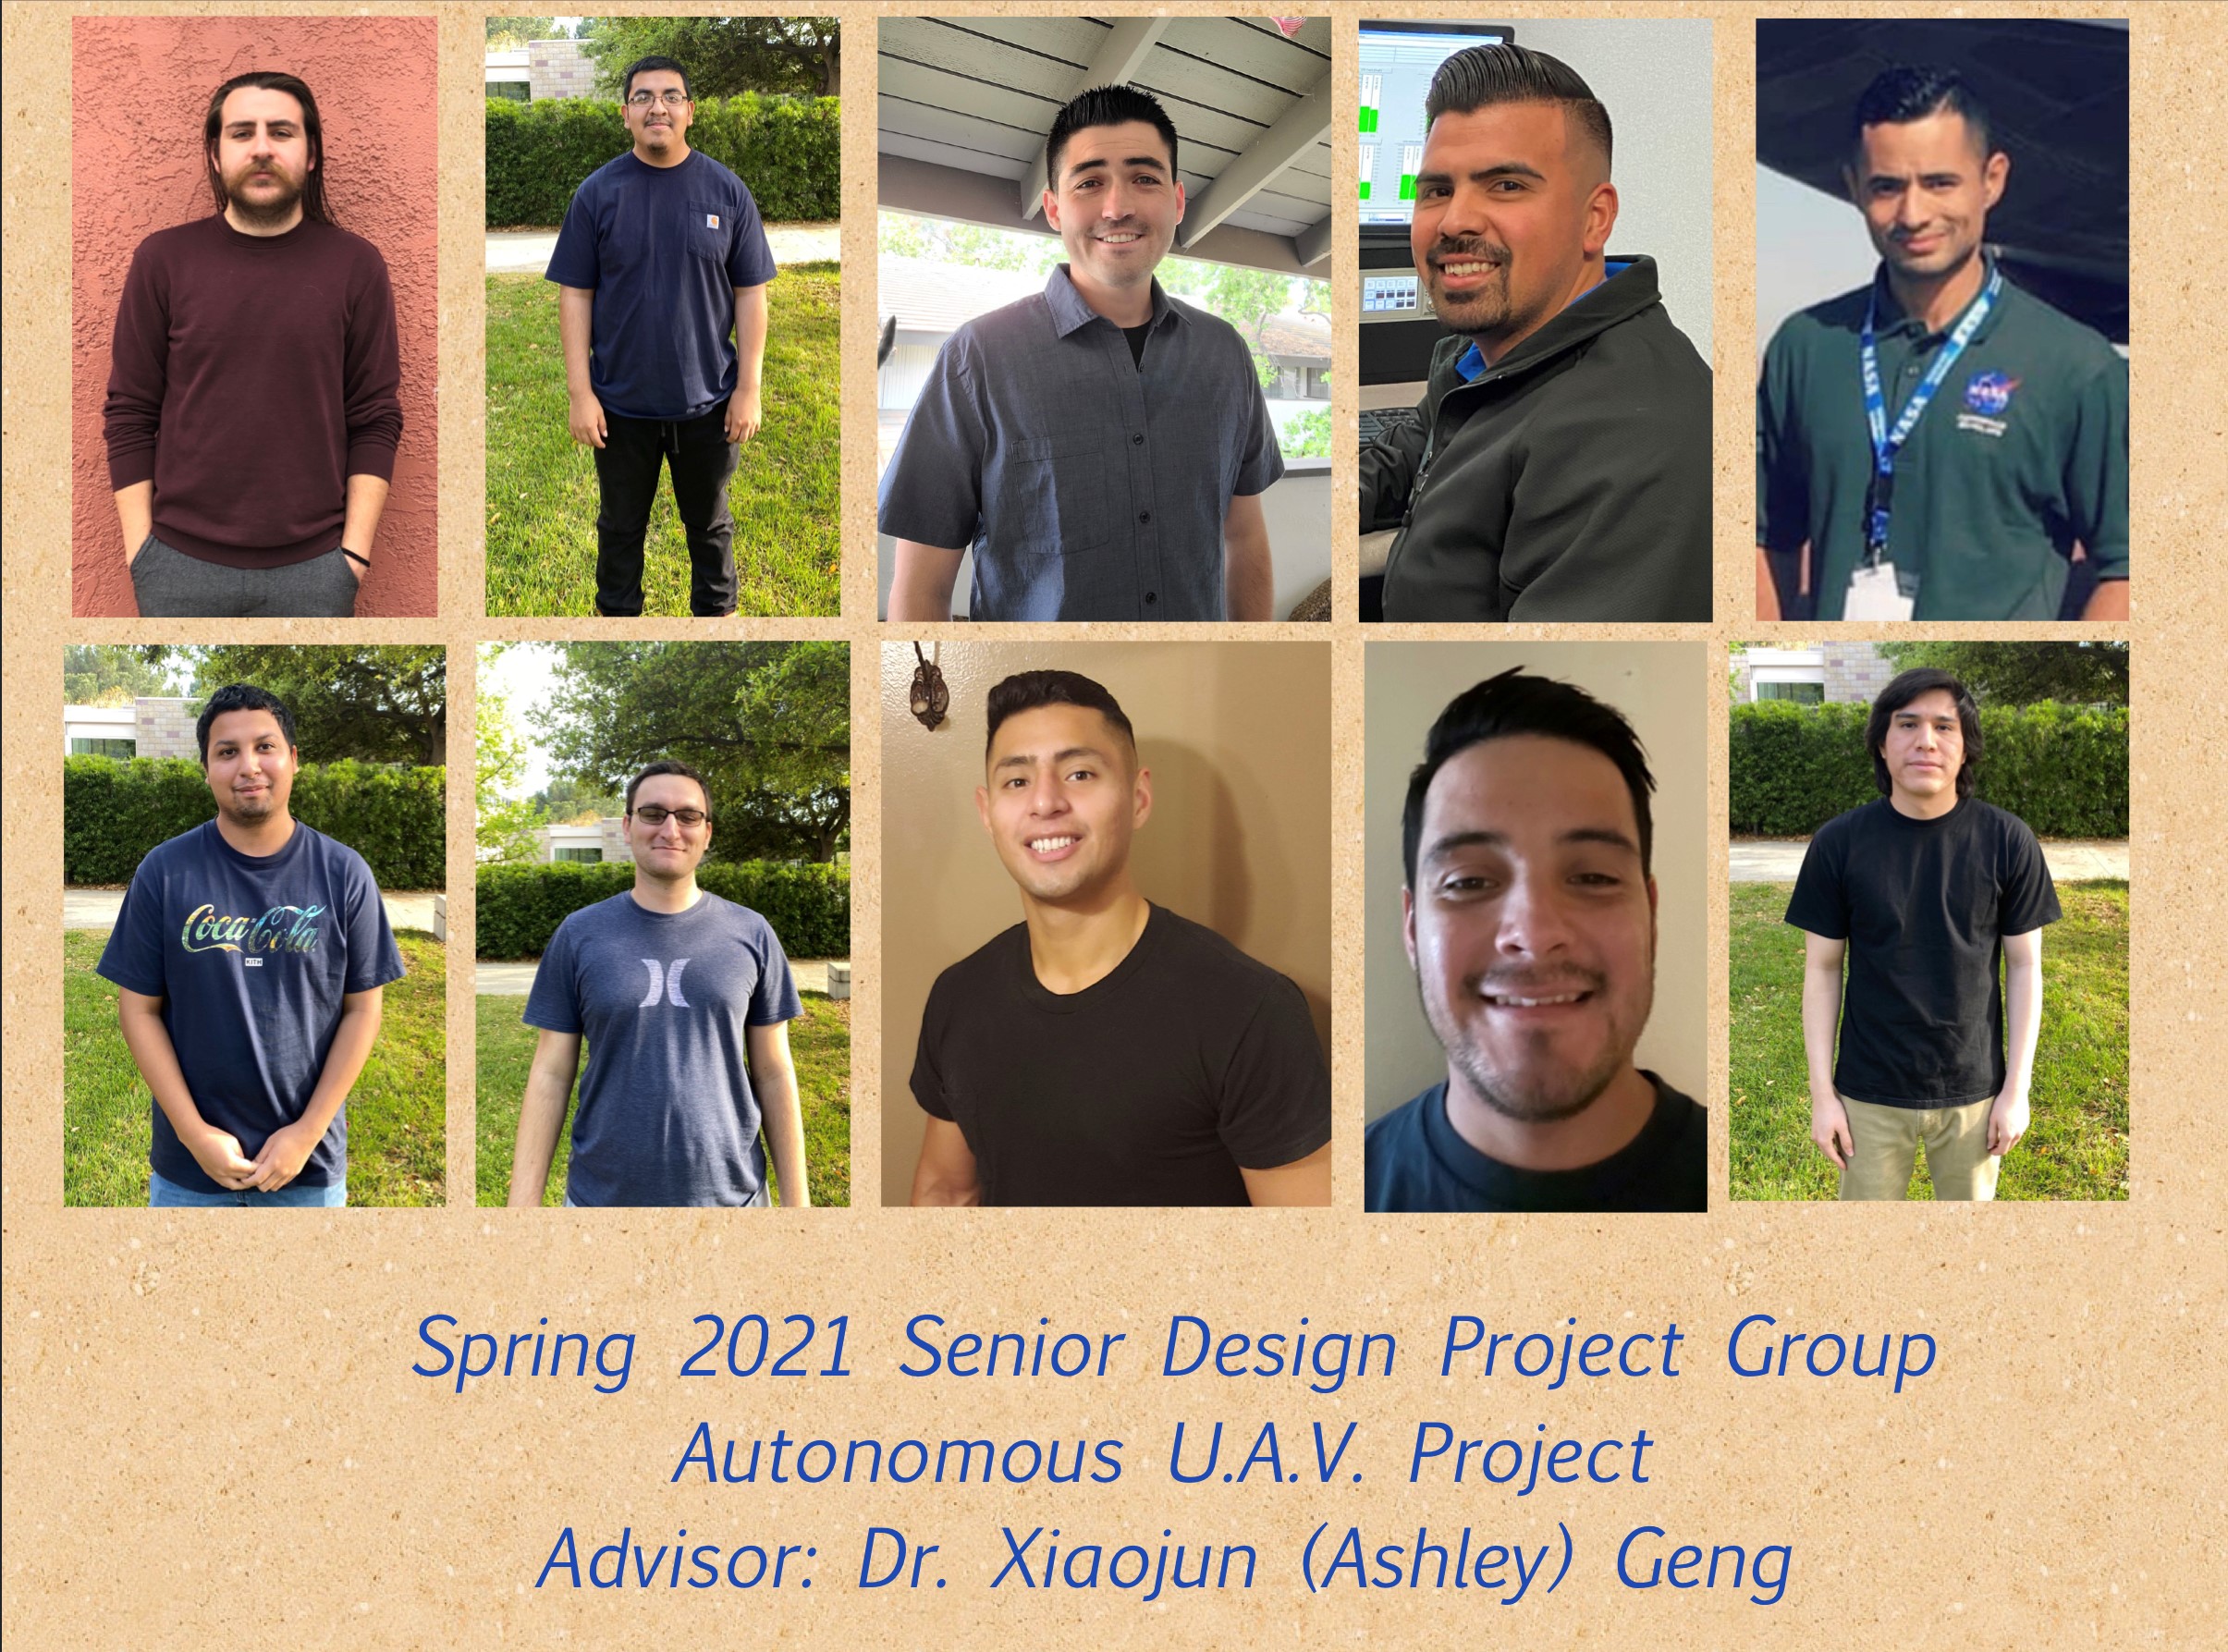 Group collage photo of the members of the team working on the Autonomous U.A.V. Project.